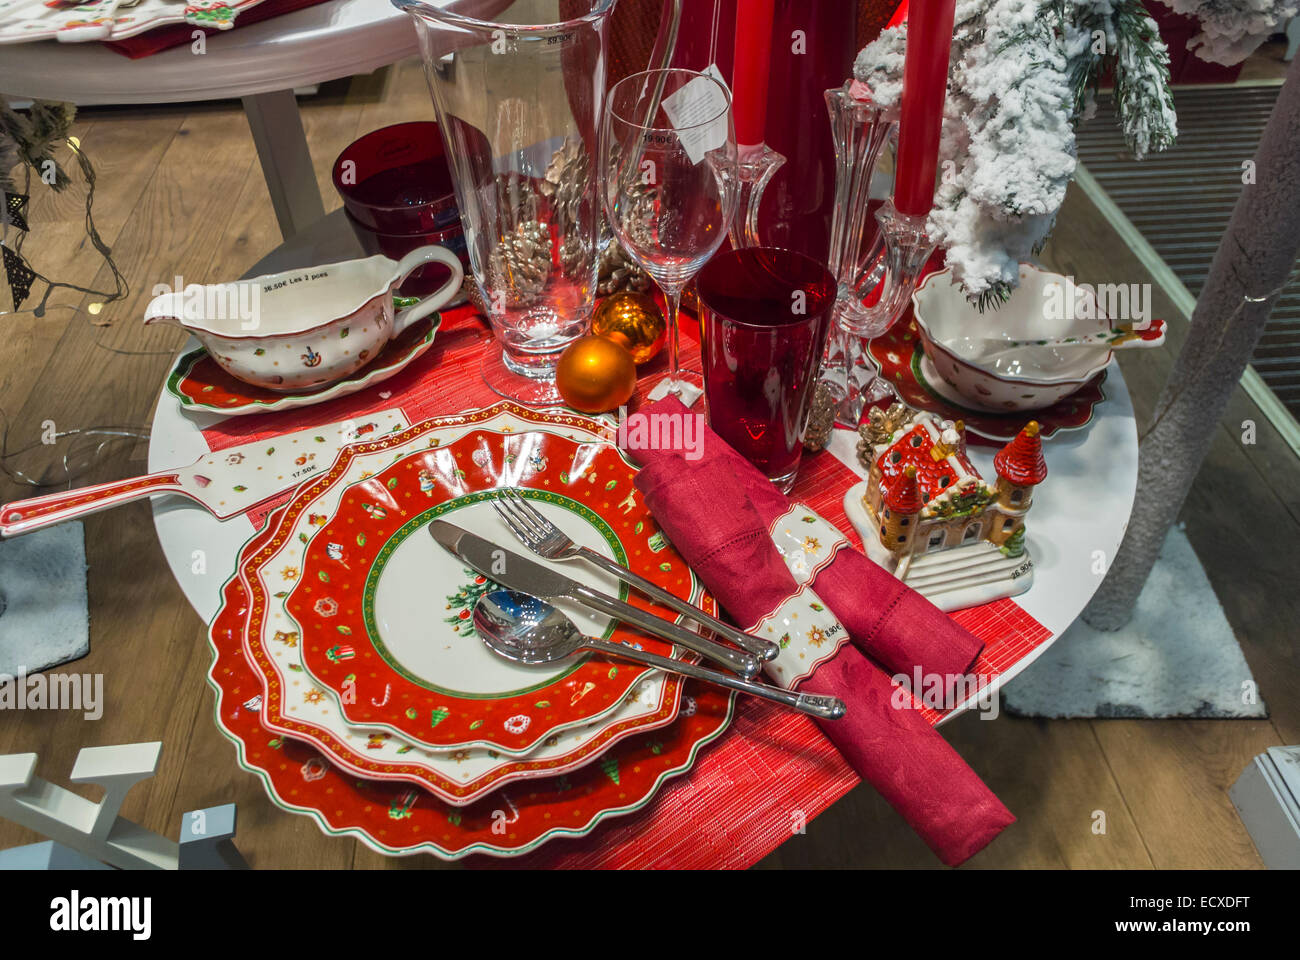 Paris, France, Christmas Decorations, Shopping, Table Setting on Display in  Shop Window Display, Zara Home Store Stock Photo - Alamy